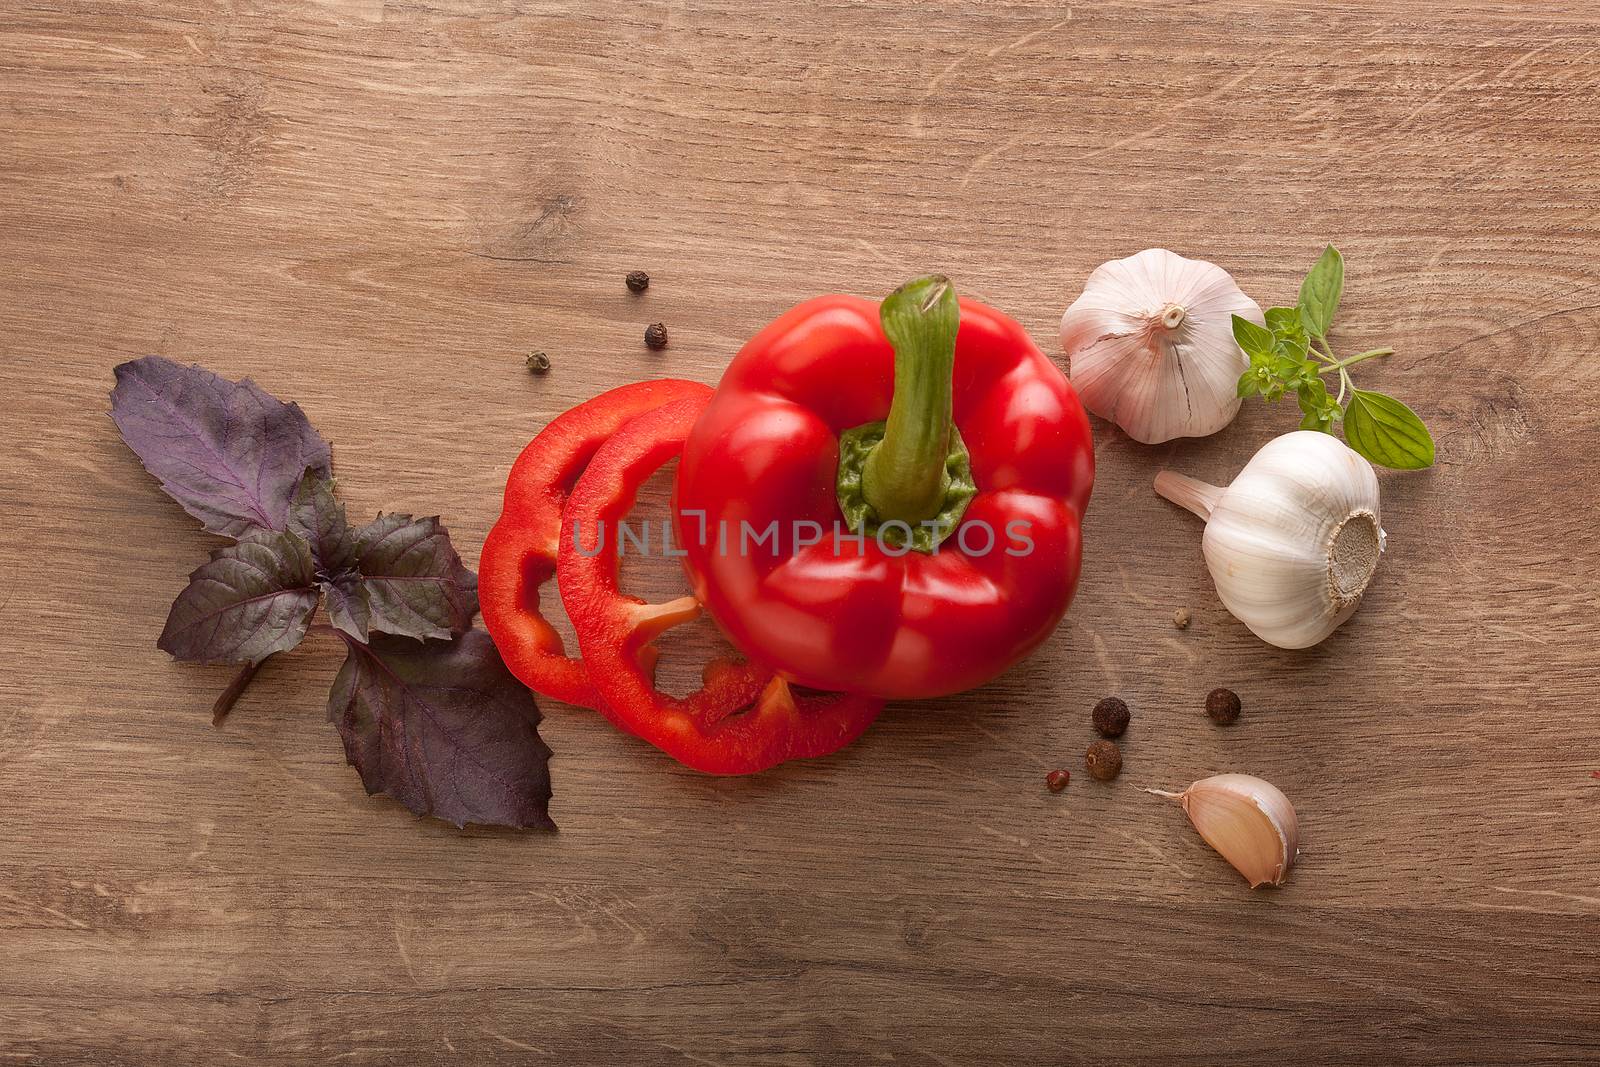 Garlic, red paprika, basil and peppers on the wooden table by Angorius